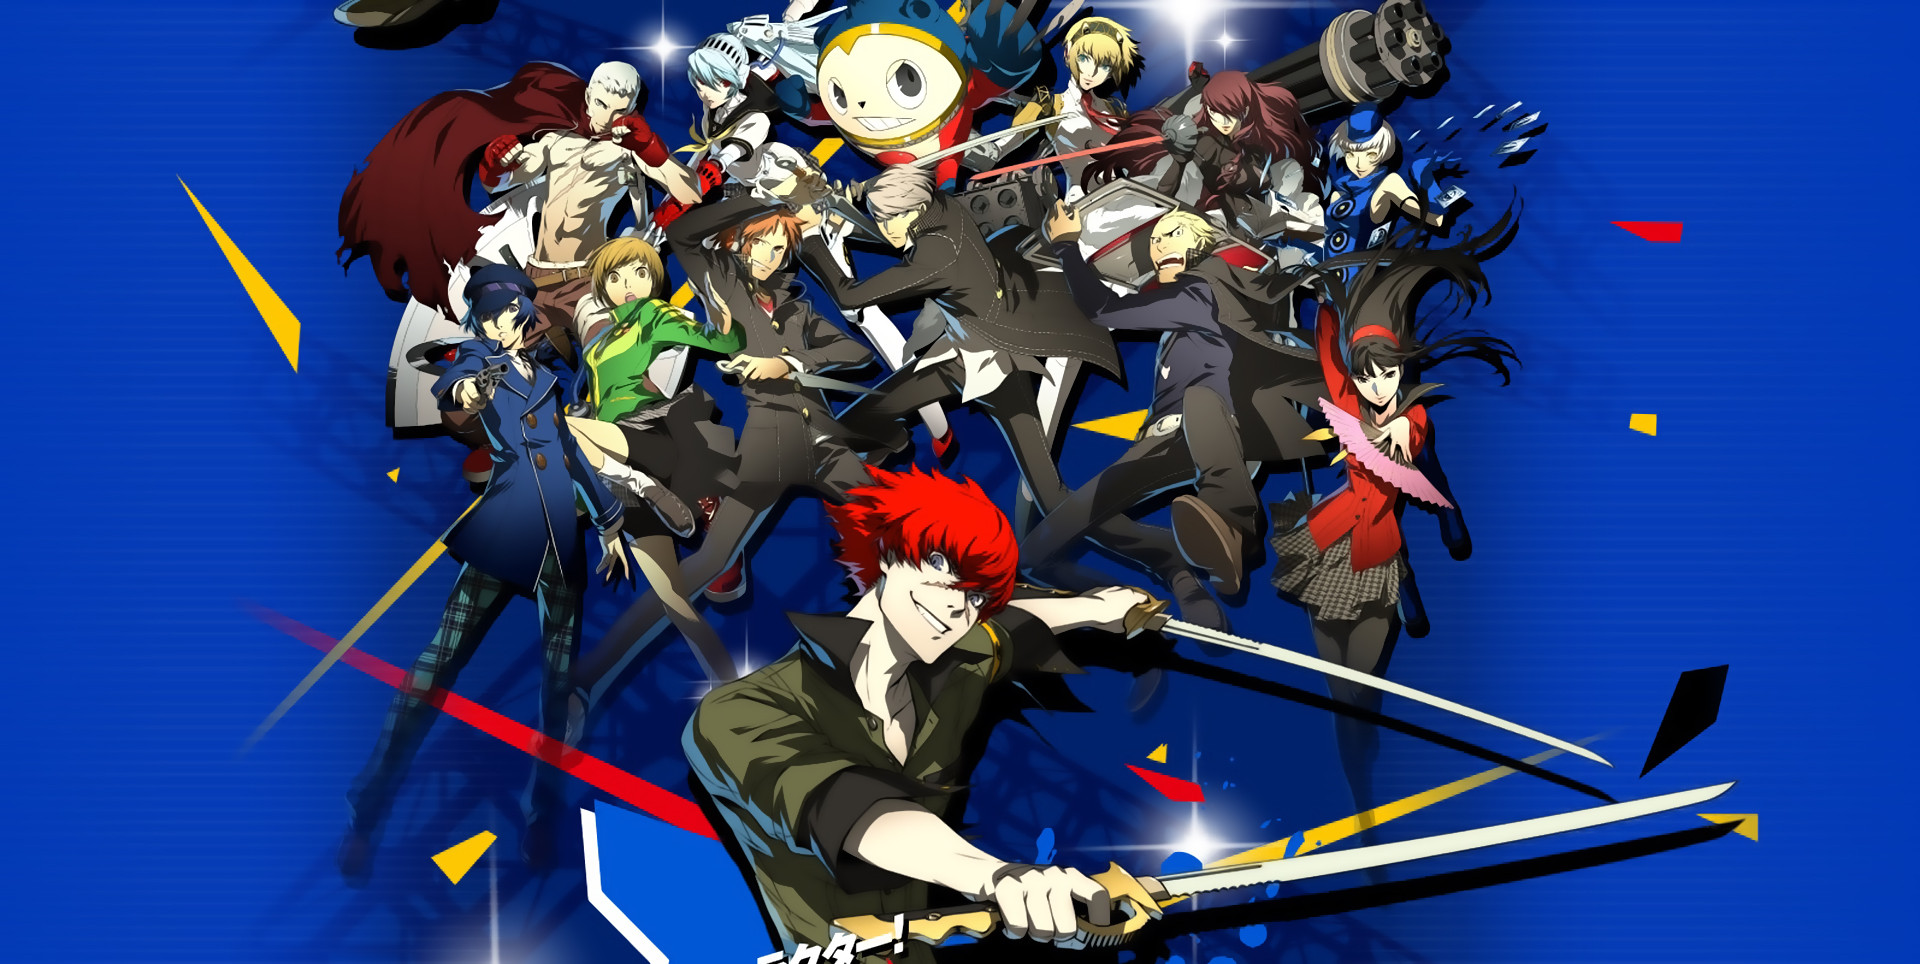 schuintrekken Stevenson storm Persona 4 Arena Ultimax will be receiving rollback netcode via update... In  the summer... and not for the Switch